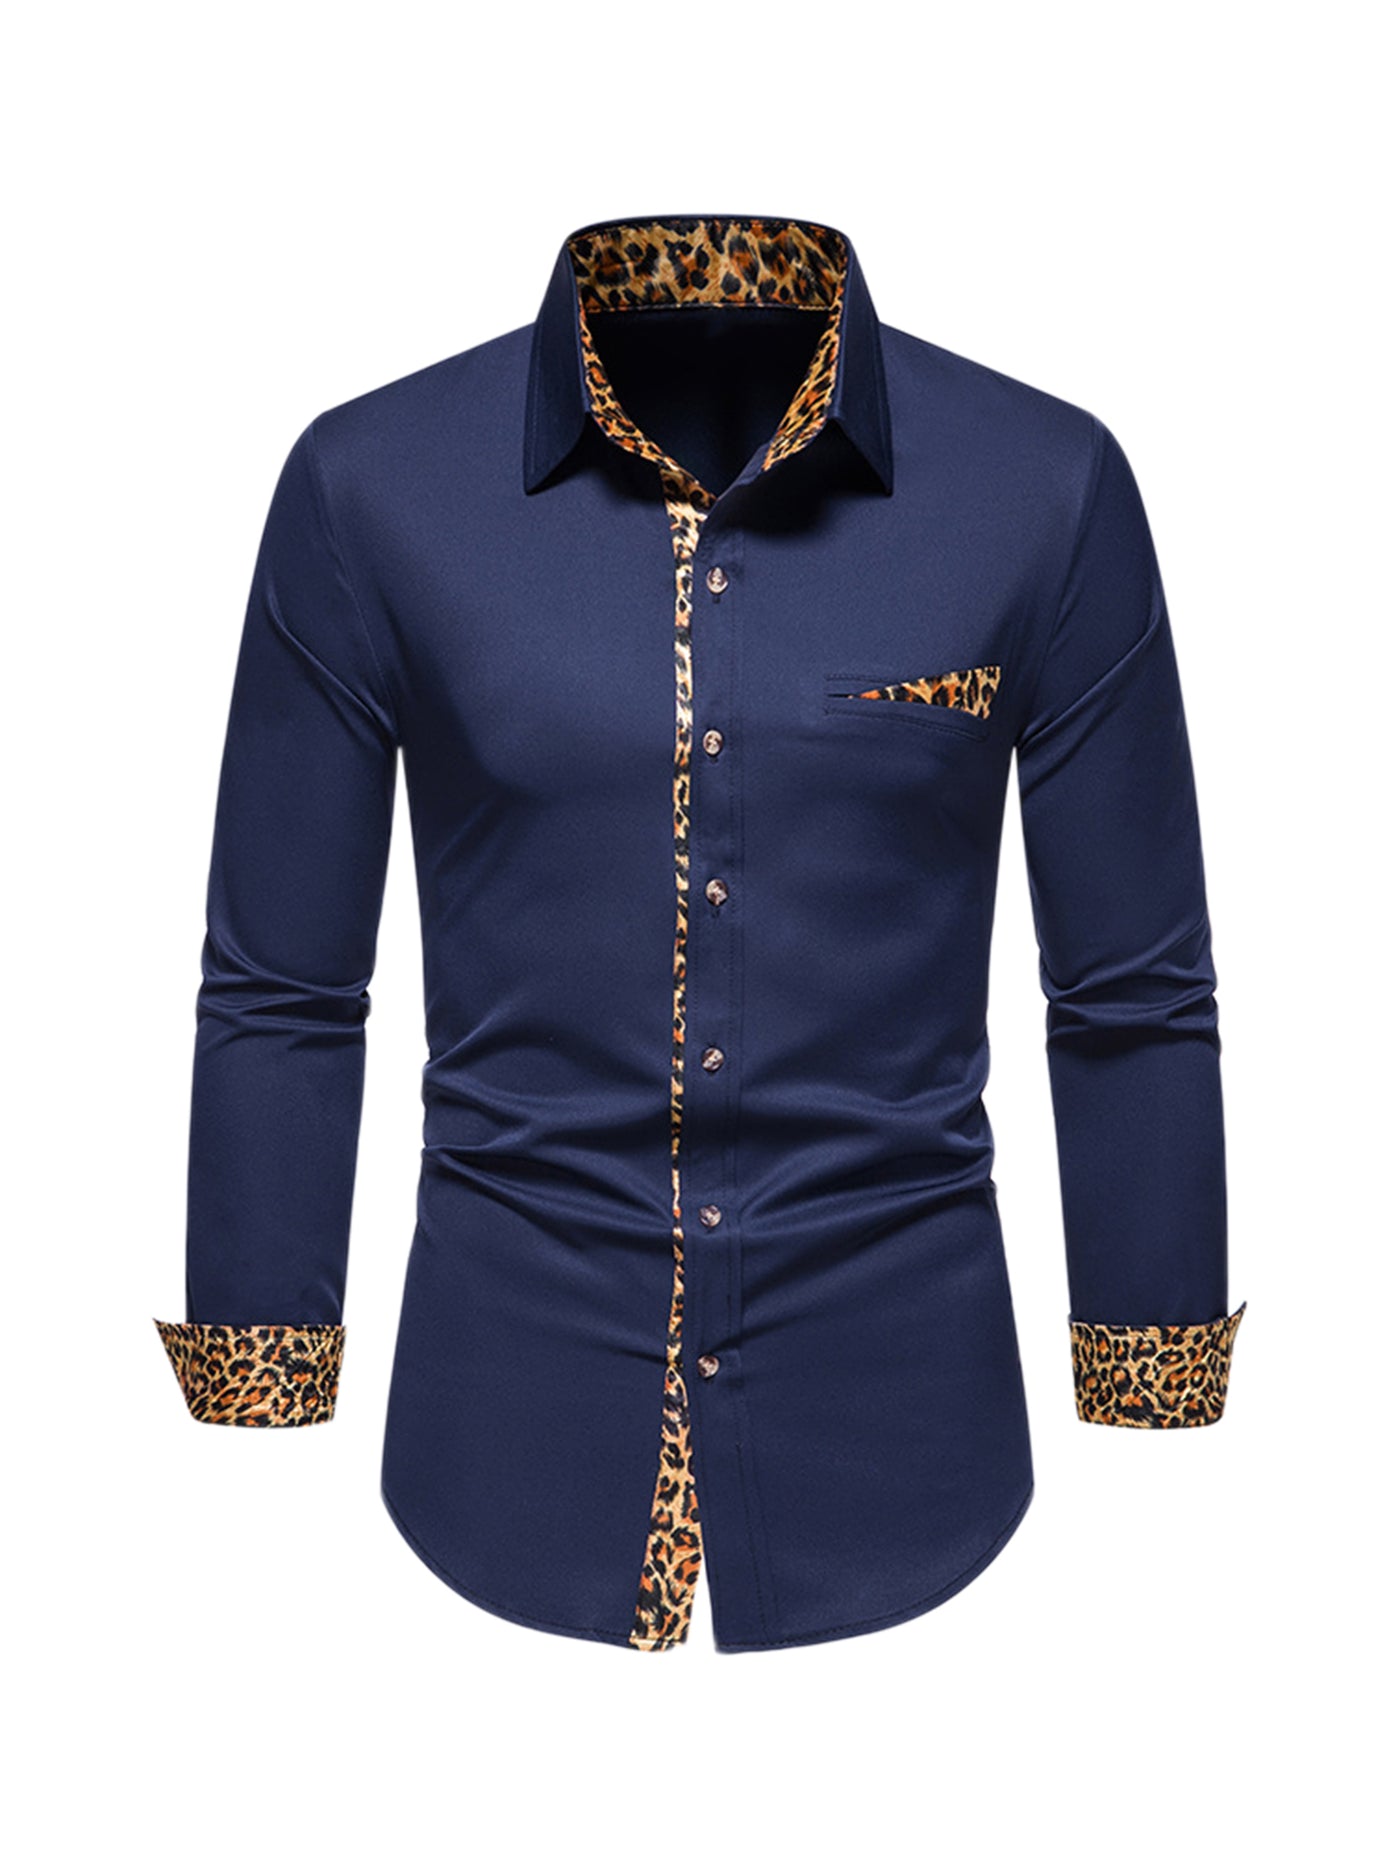 Bublédon Men's Long Sleeves Button Down Constrast Leopard Printed Party Dress Shirts